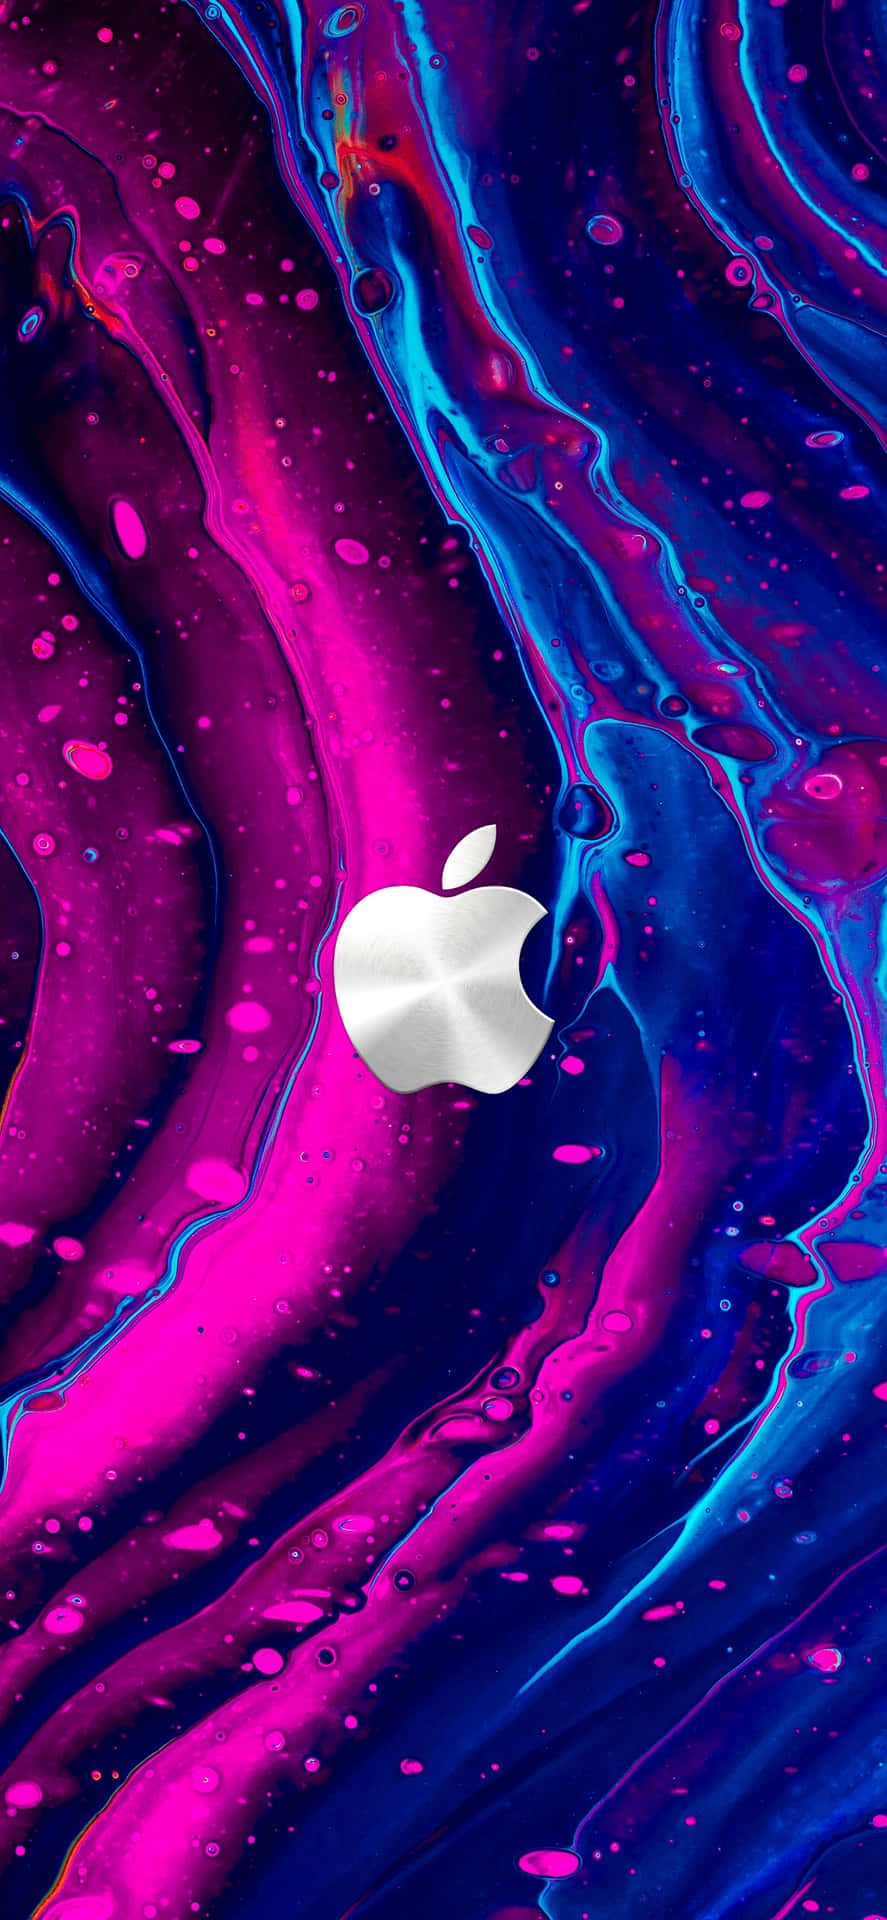 Enjoy Clear Viewing in 4K Resolution with Apple Wallpaper